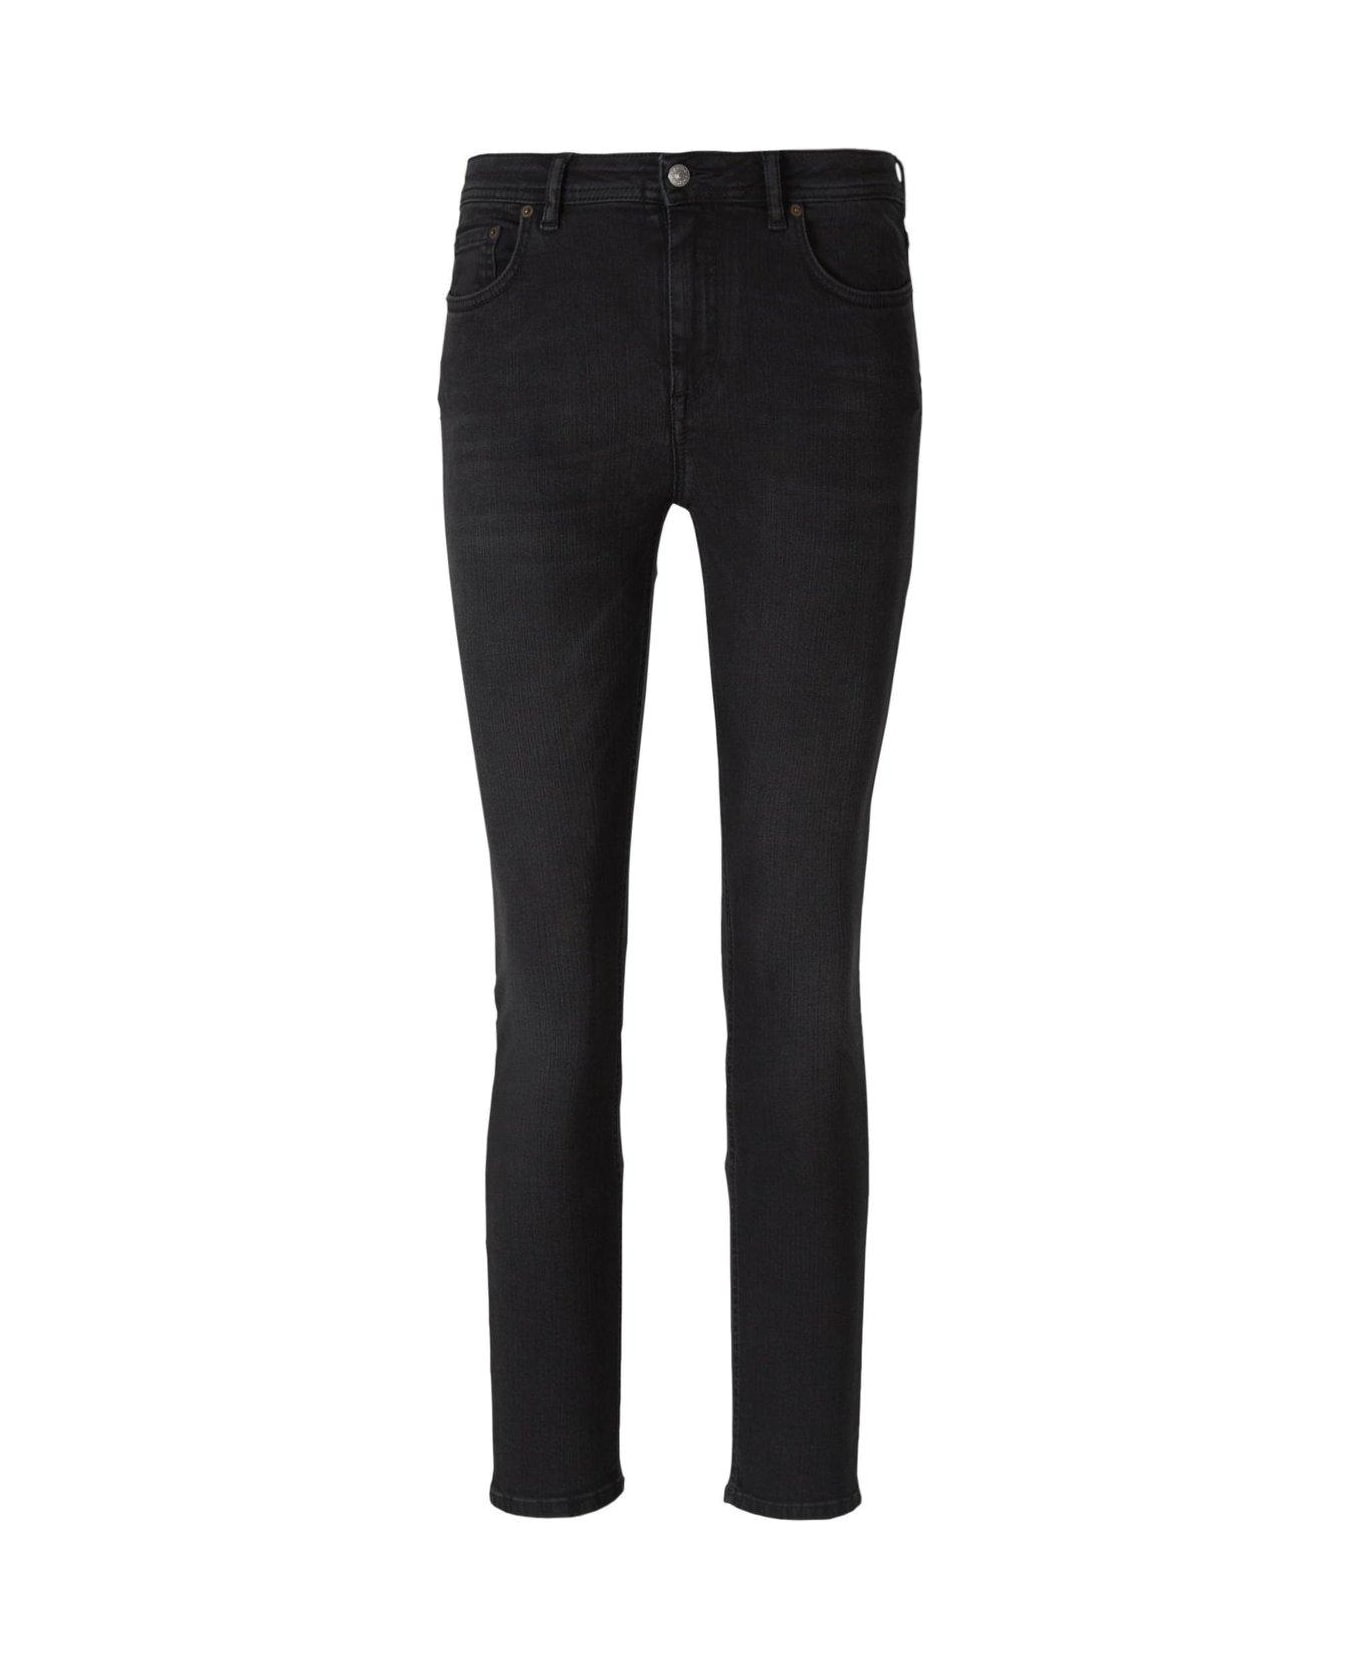 Acne Studios Fade Effect Mid-rise Skinny Jeans - Used black